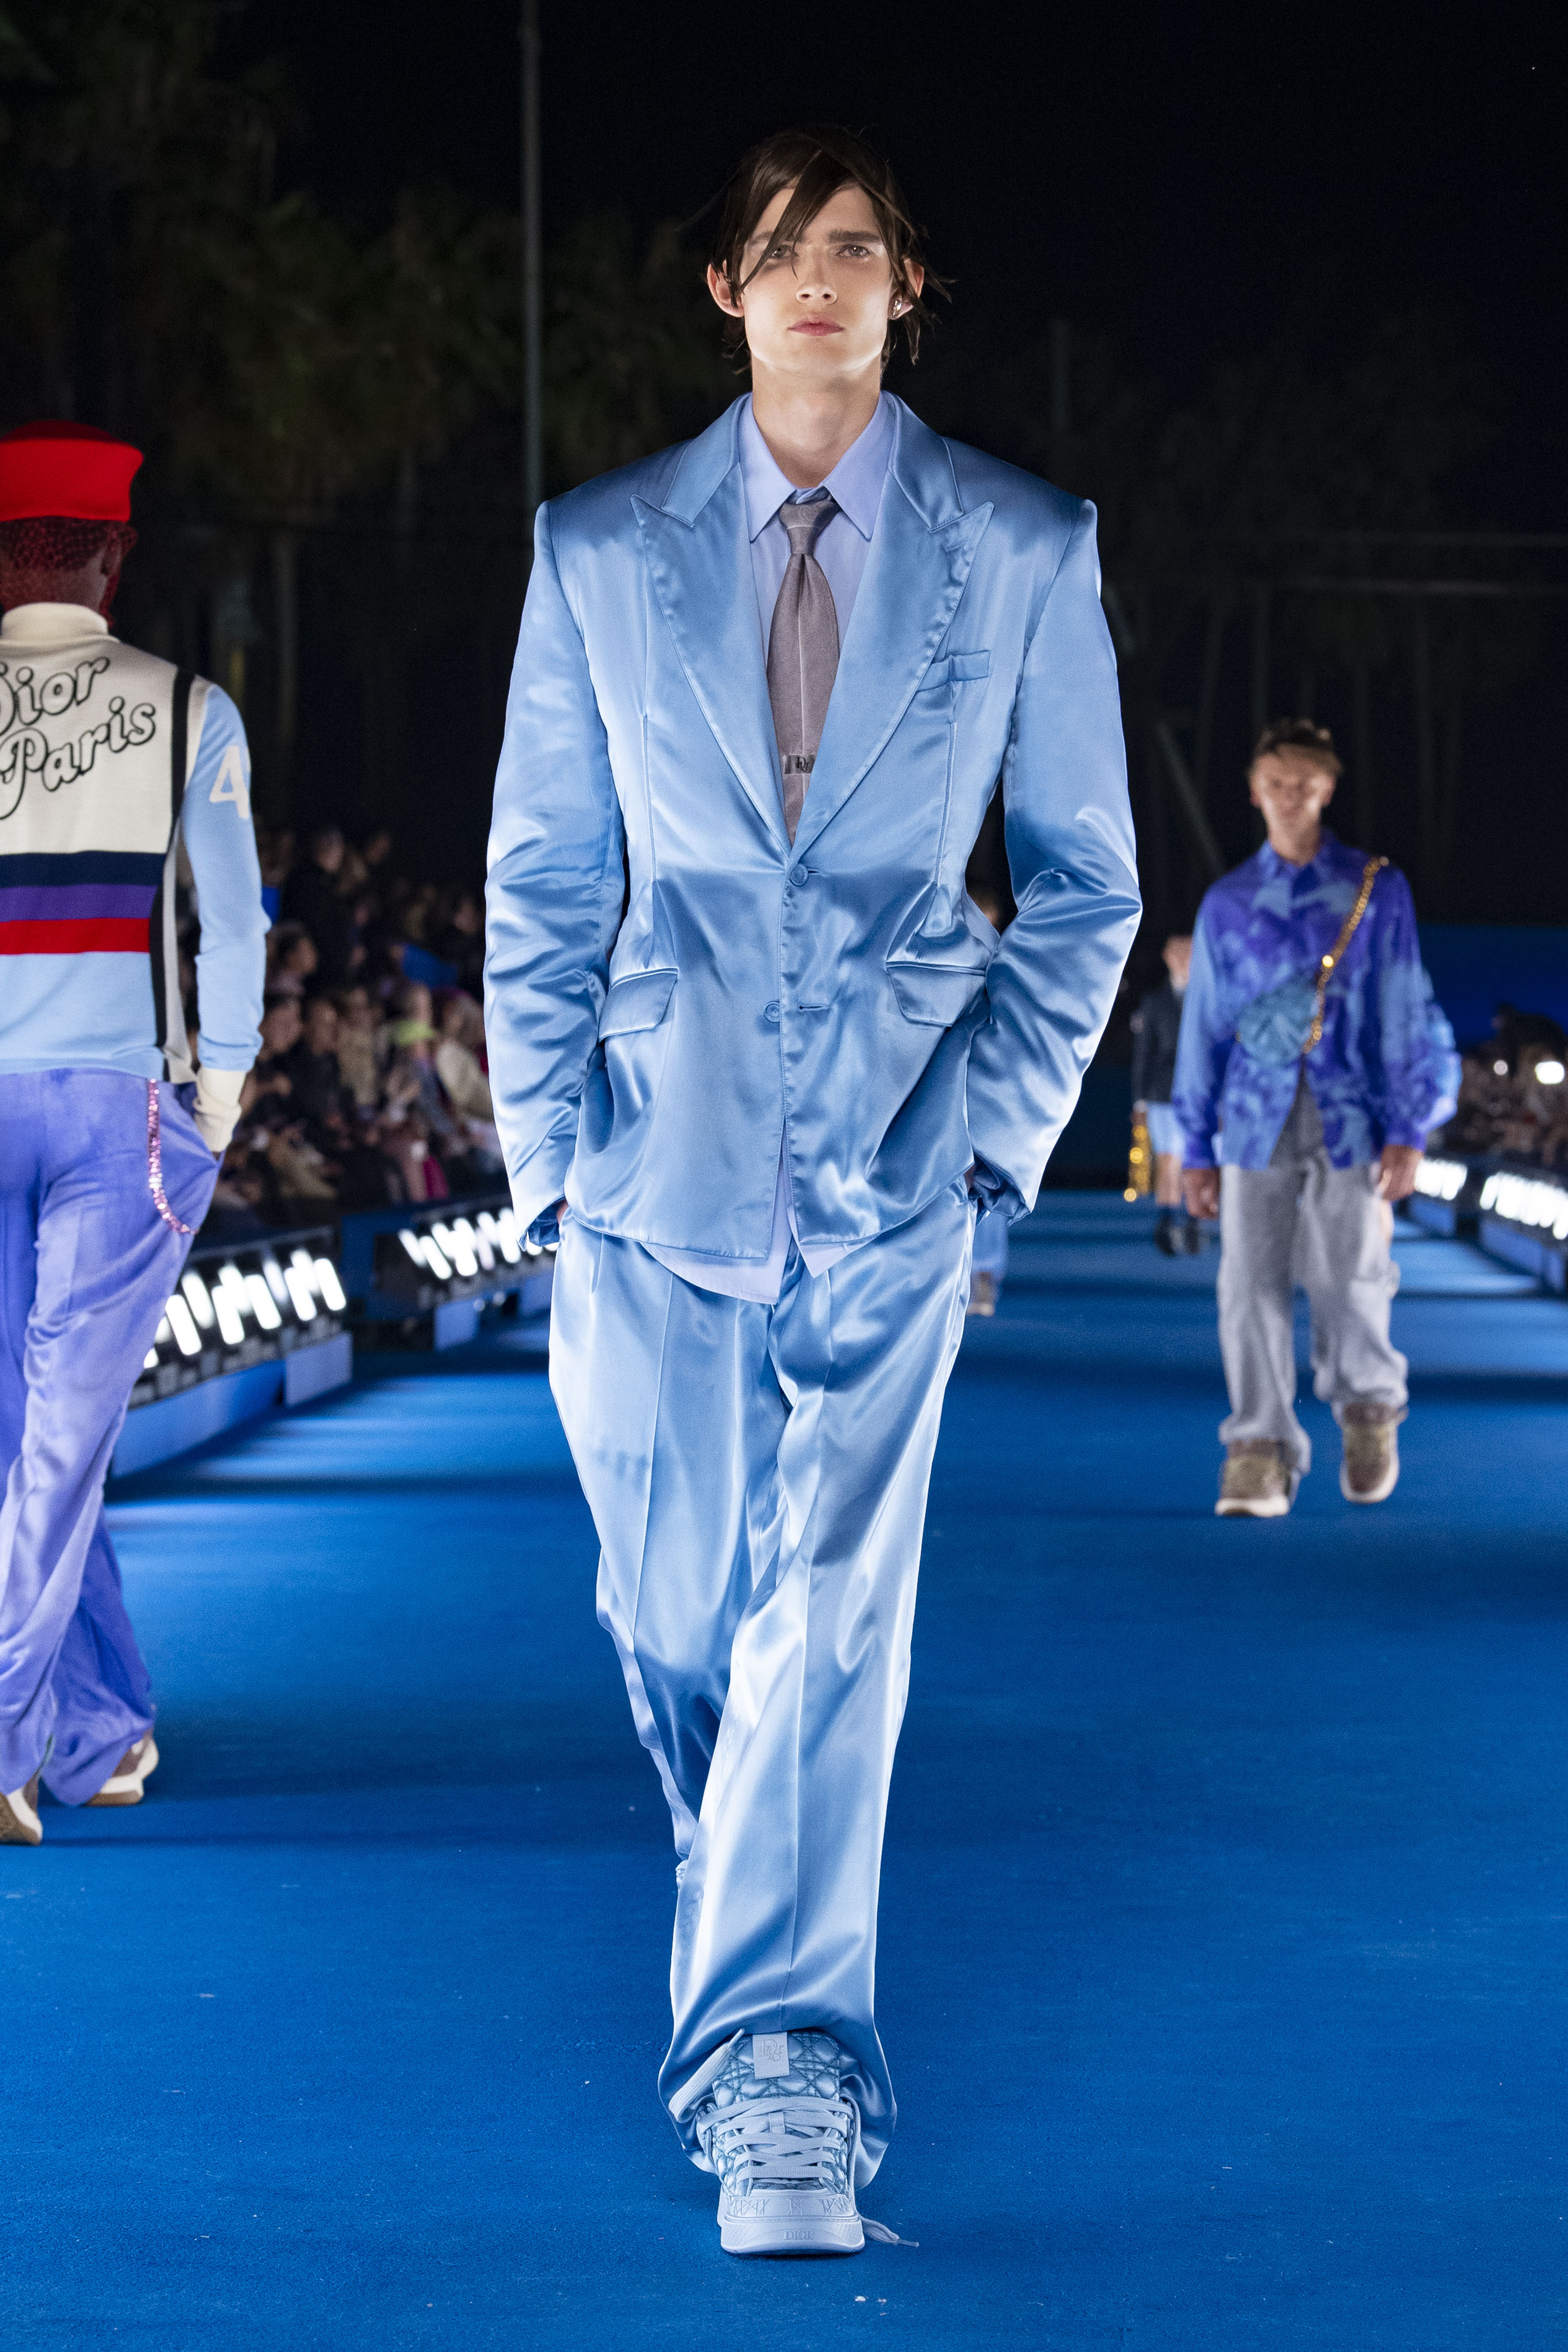 I saw a million ideas all at once': Dior Men's Kim Jones and